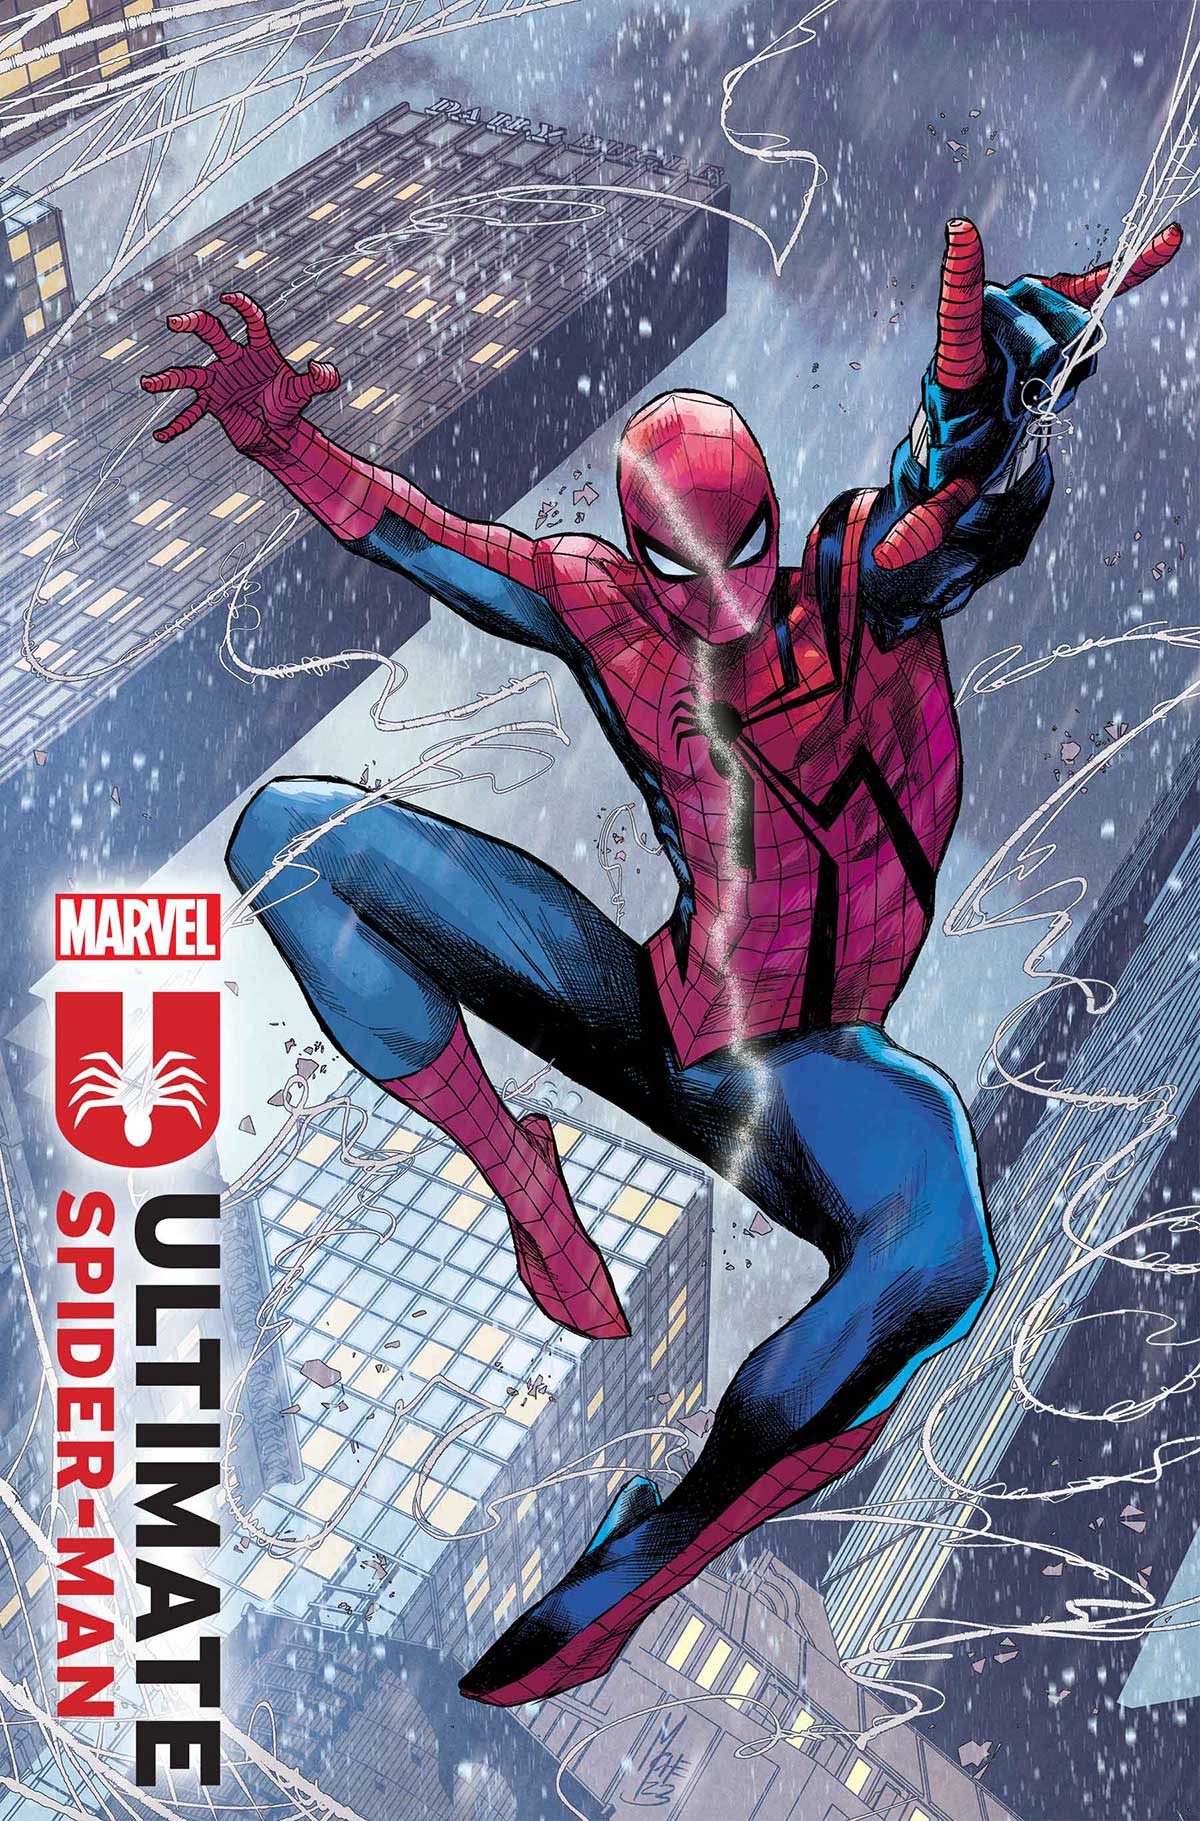 Marvel's Spider-Man 2 Variant Covers Spotlight 10 Spidey Suits